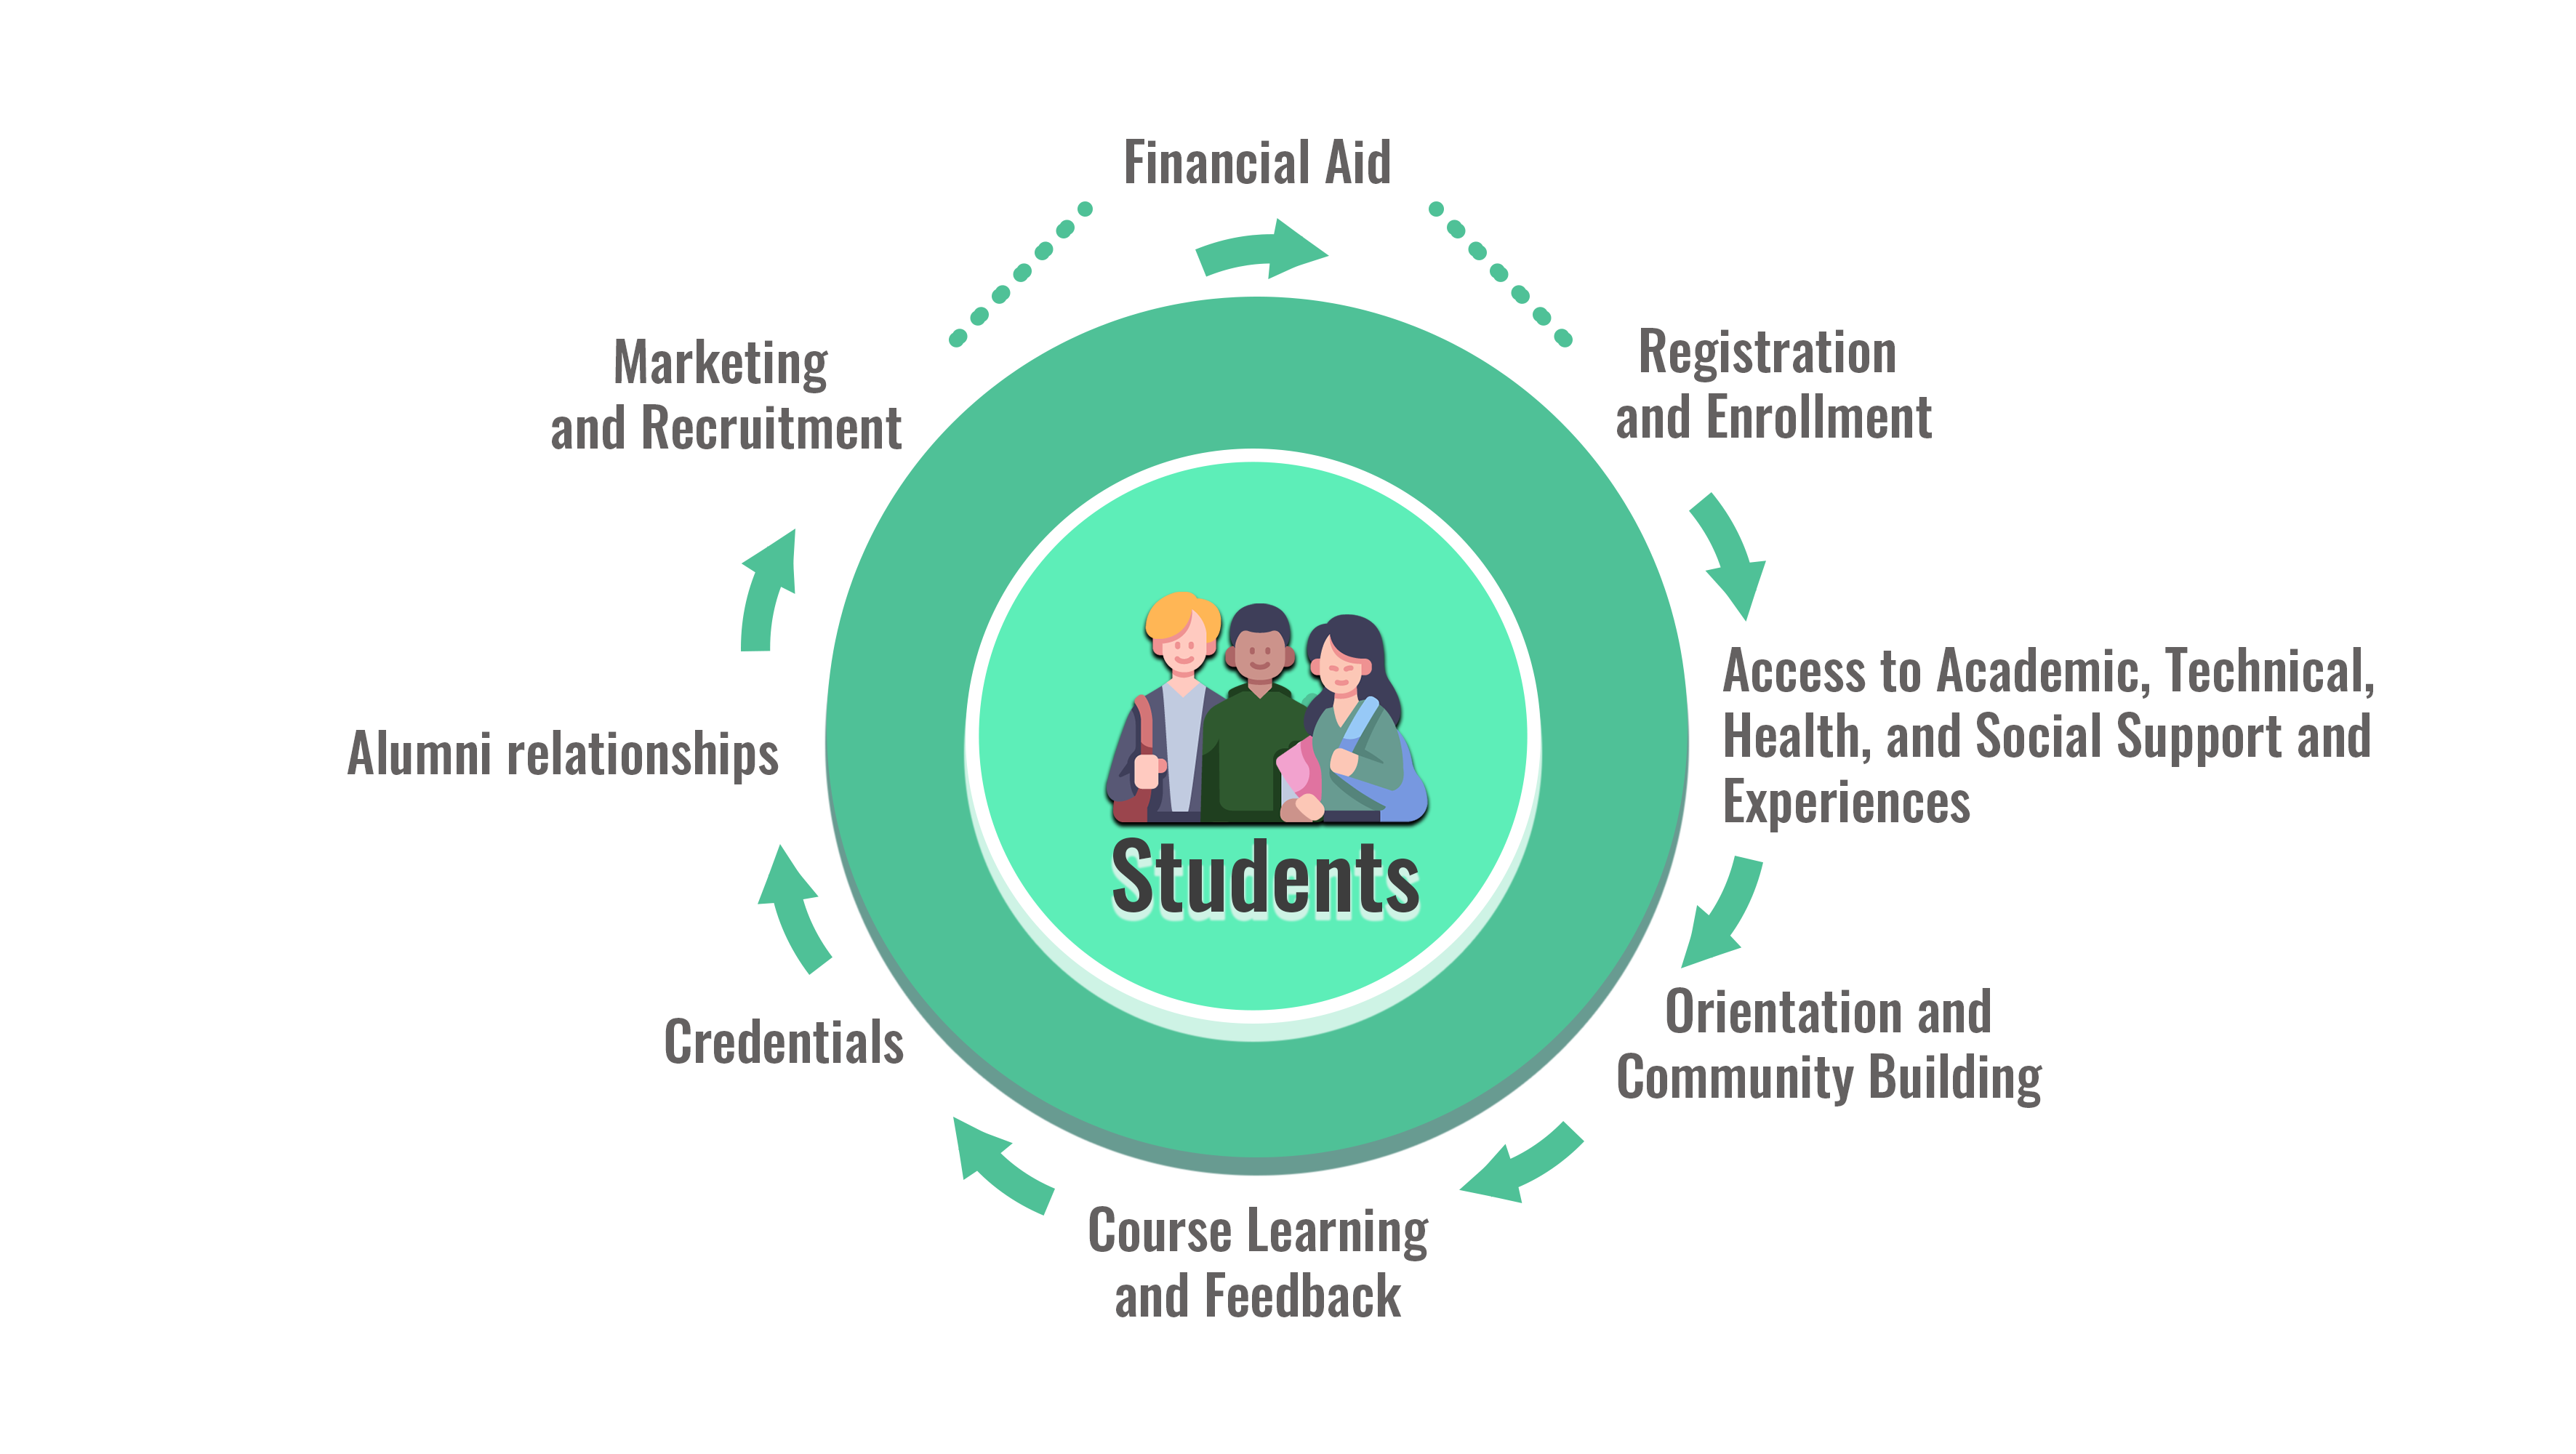 Collaborating to Create the Online Student Life Cycle and Its Ecosystem